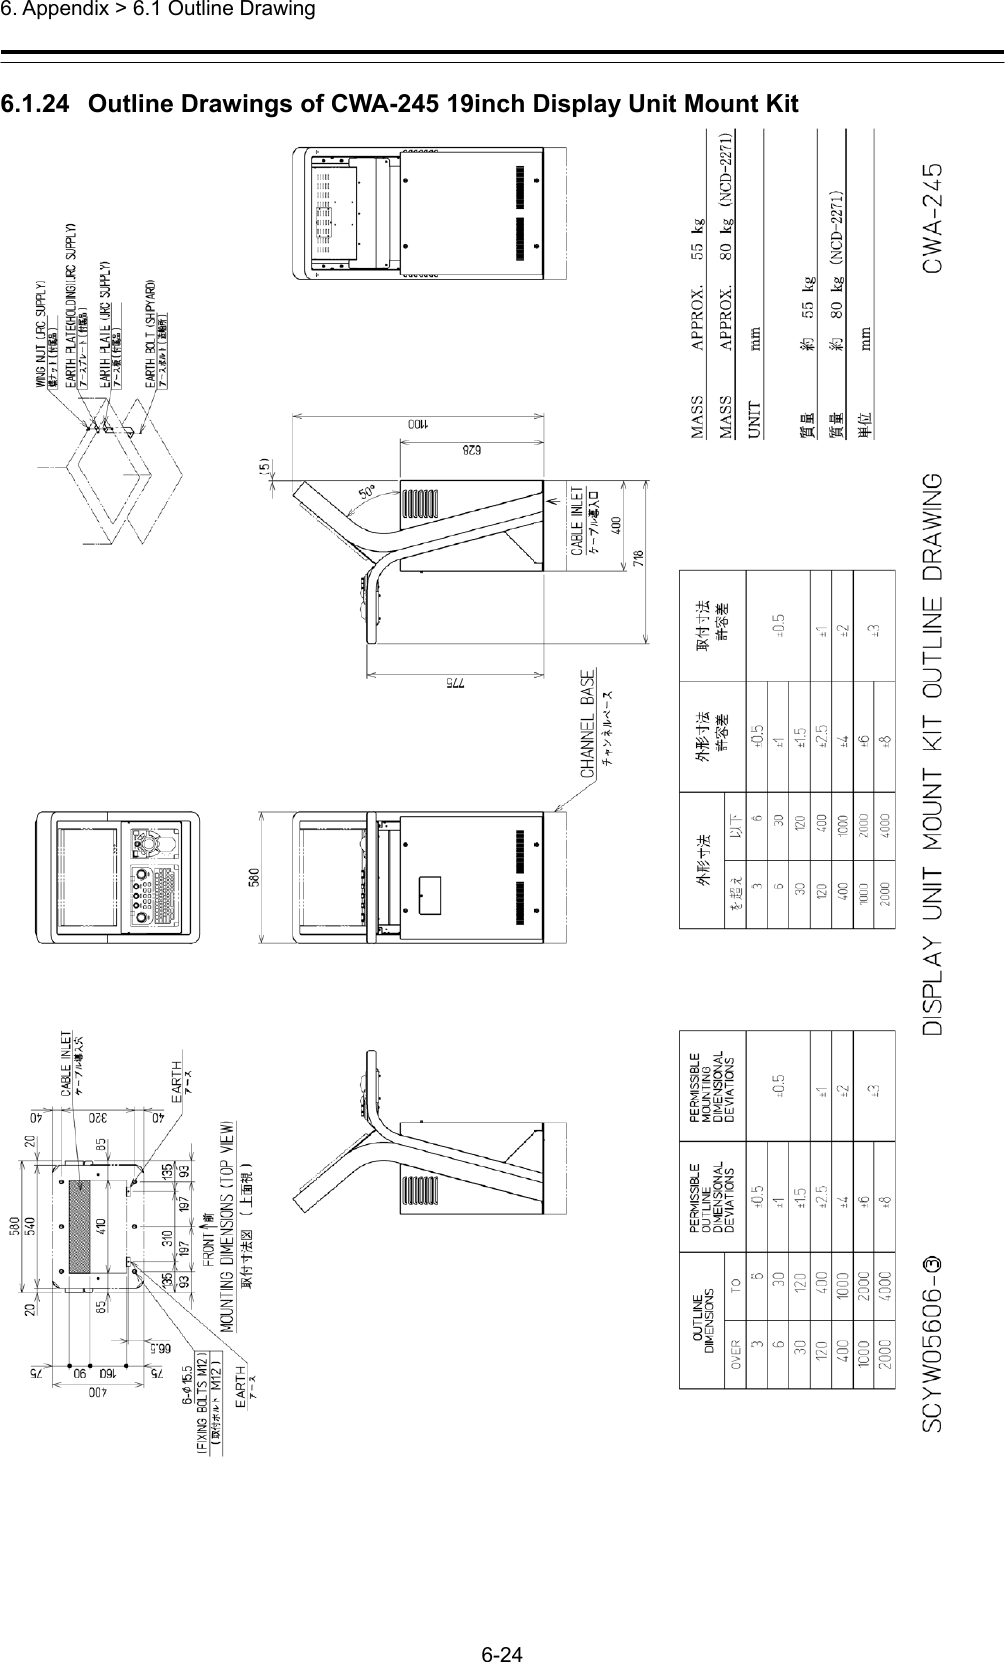  6. Appendix &gt; 6.1 Outline Drawing 6-24  6.1.24   Outline Drawings of CWA-245 19inch Display Unit Mount Kit  